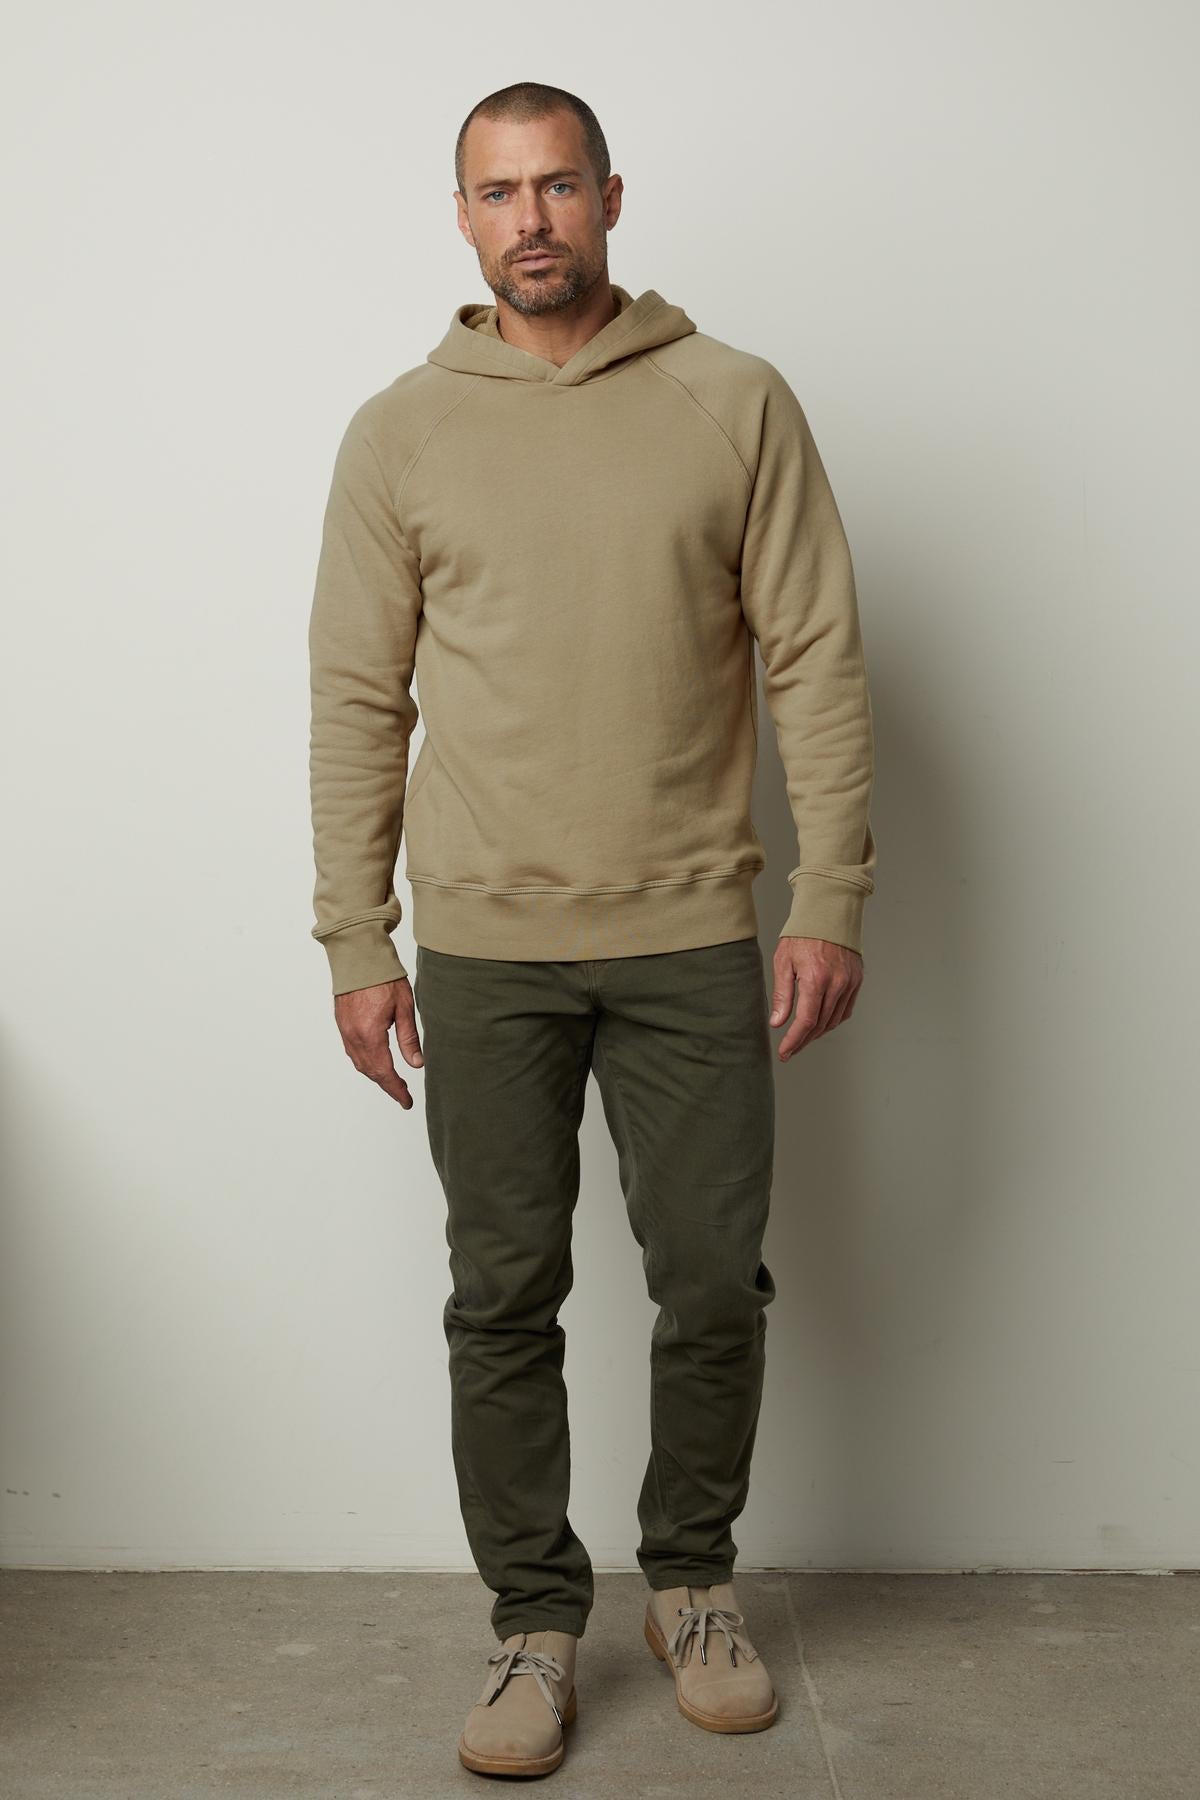 A man wearing a Velvet by Graham & Spencer HOPKIN PULLOVER HOODIE crafted from brushed fleece and khaki pants.-35547533967553